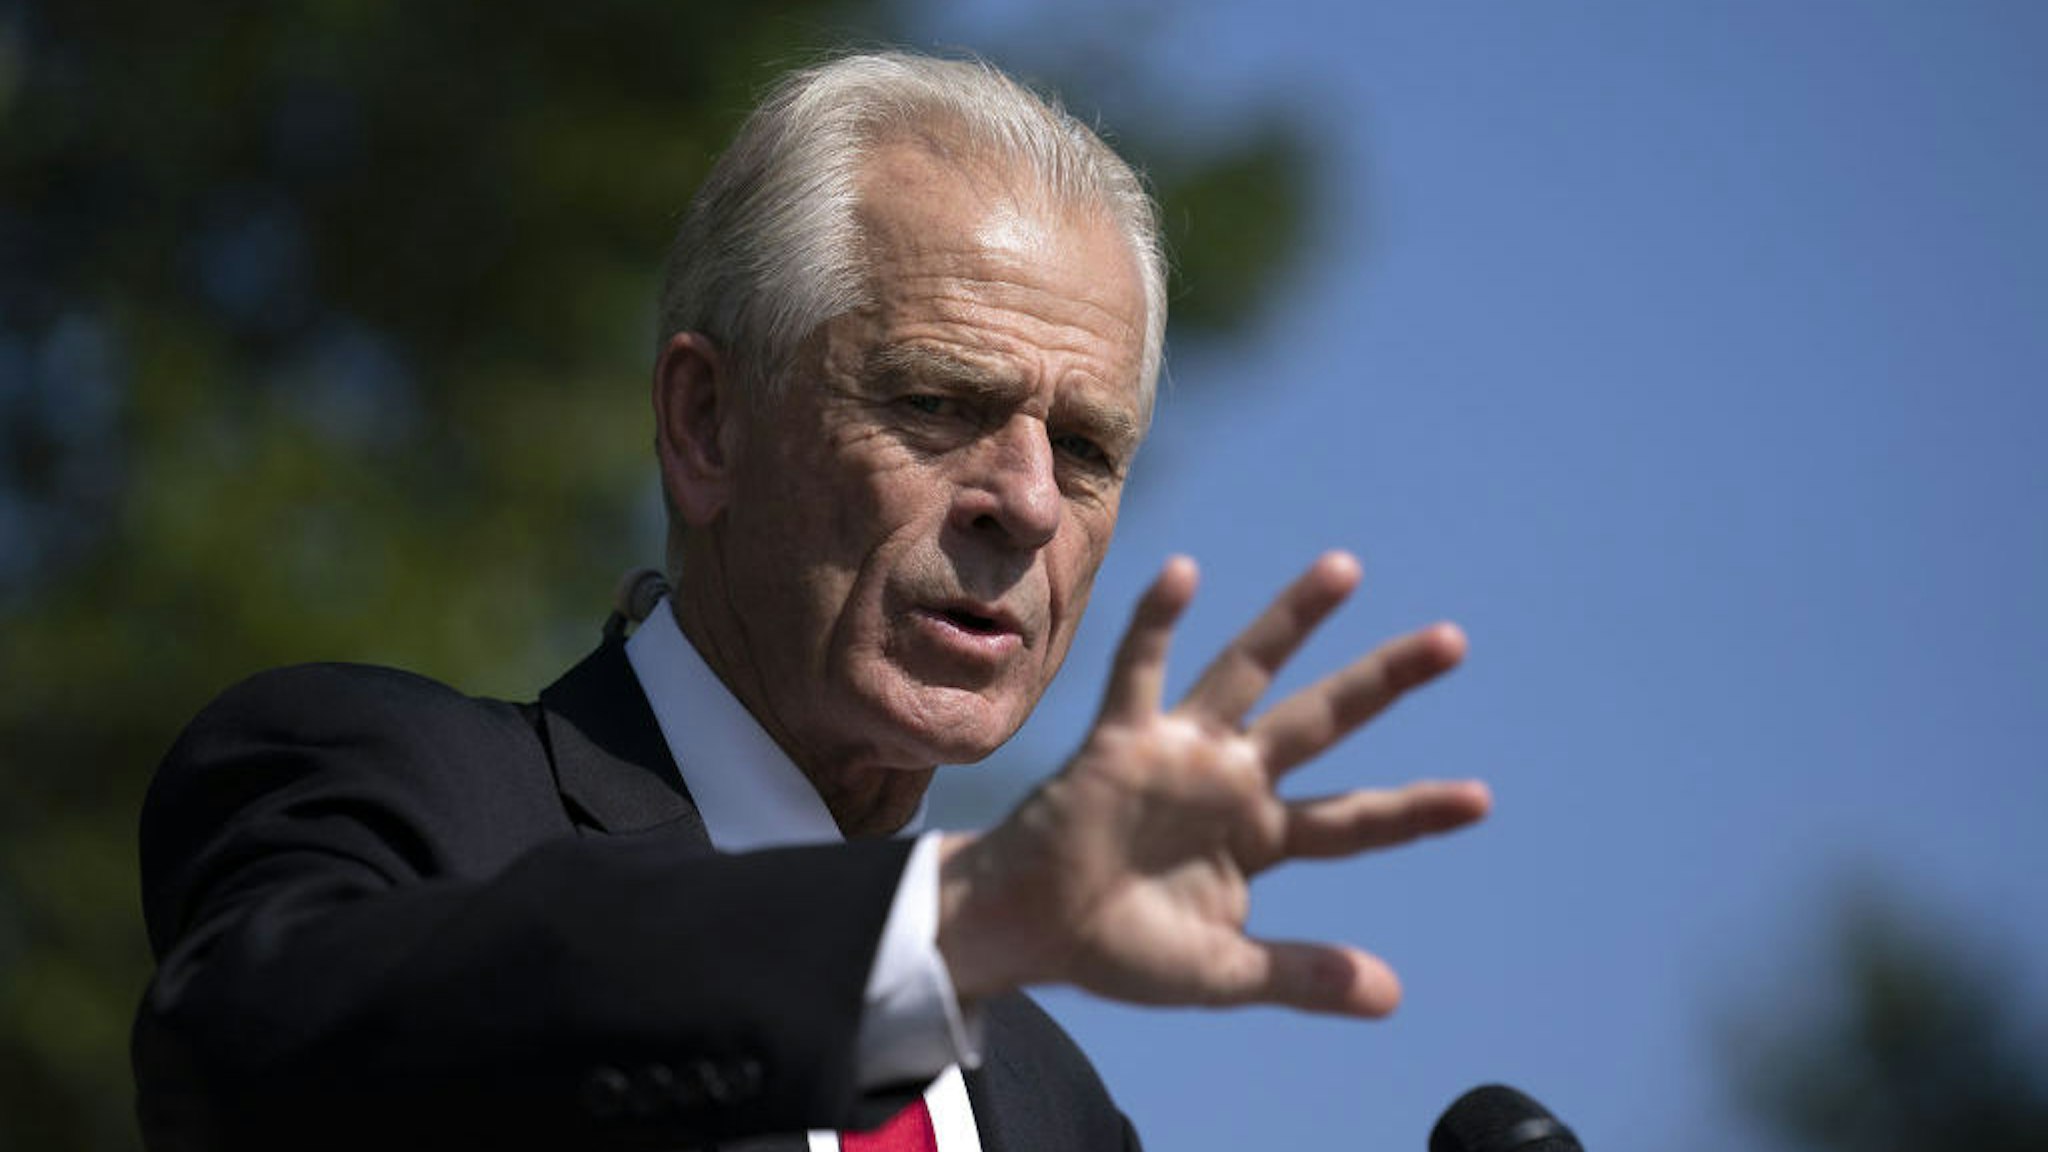 Peter Navarro, director of the National Trade Council, speaks to members of the media outside the White House in Washington, D.C., U.S., on Friday, Aug. 28, 2020. Navarro, who has come out against a potential sale to Microsoft and advocated banning TikTok completely, has been at odds with Treasury Secretary Steven Mnuchin, who wants the app sold, according to a person familiar with the deliberations within the White House. Navarro said there were “no tensions whatsoever” between himself and Mnuchin. Photographer: Stefani Reynolds/Sipa/Bloomberg